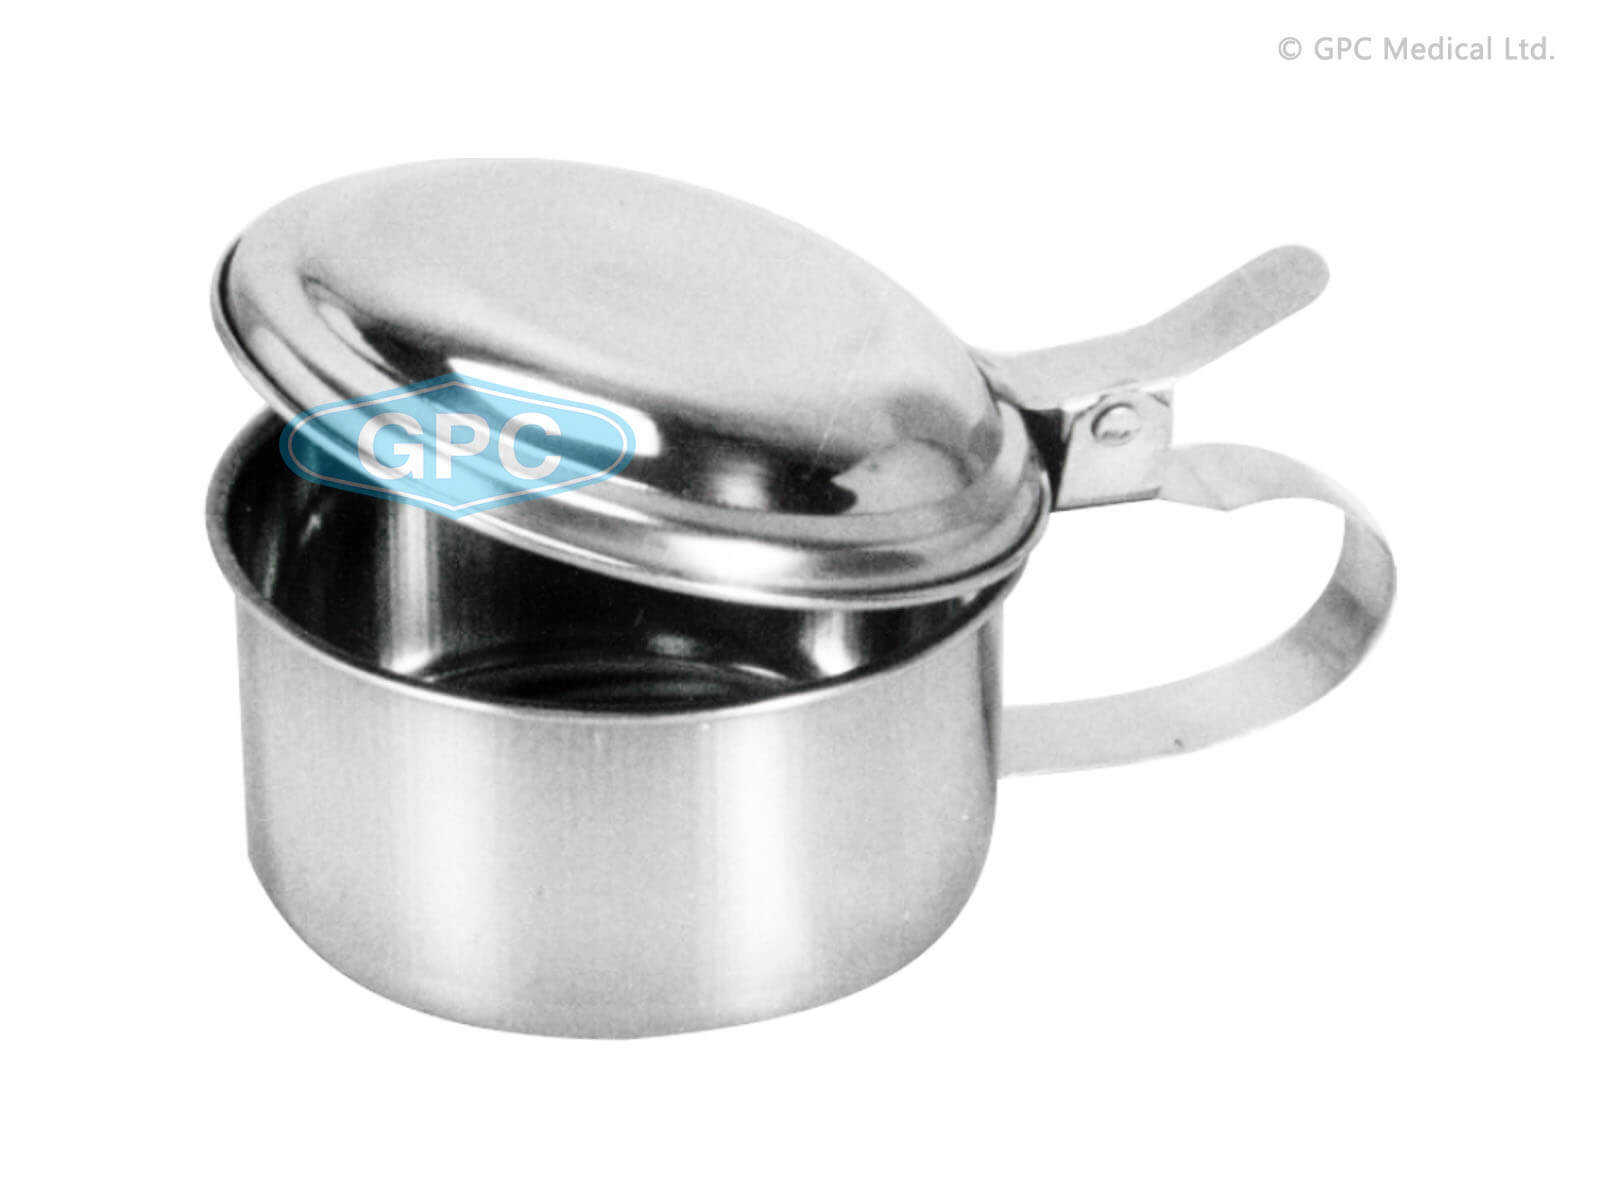 Sputum Mugs with cover, Stainless Steel